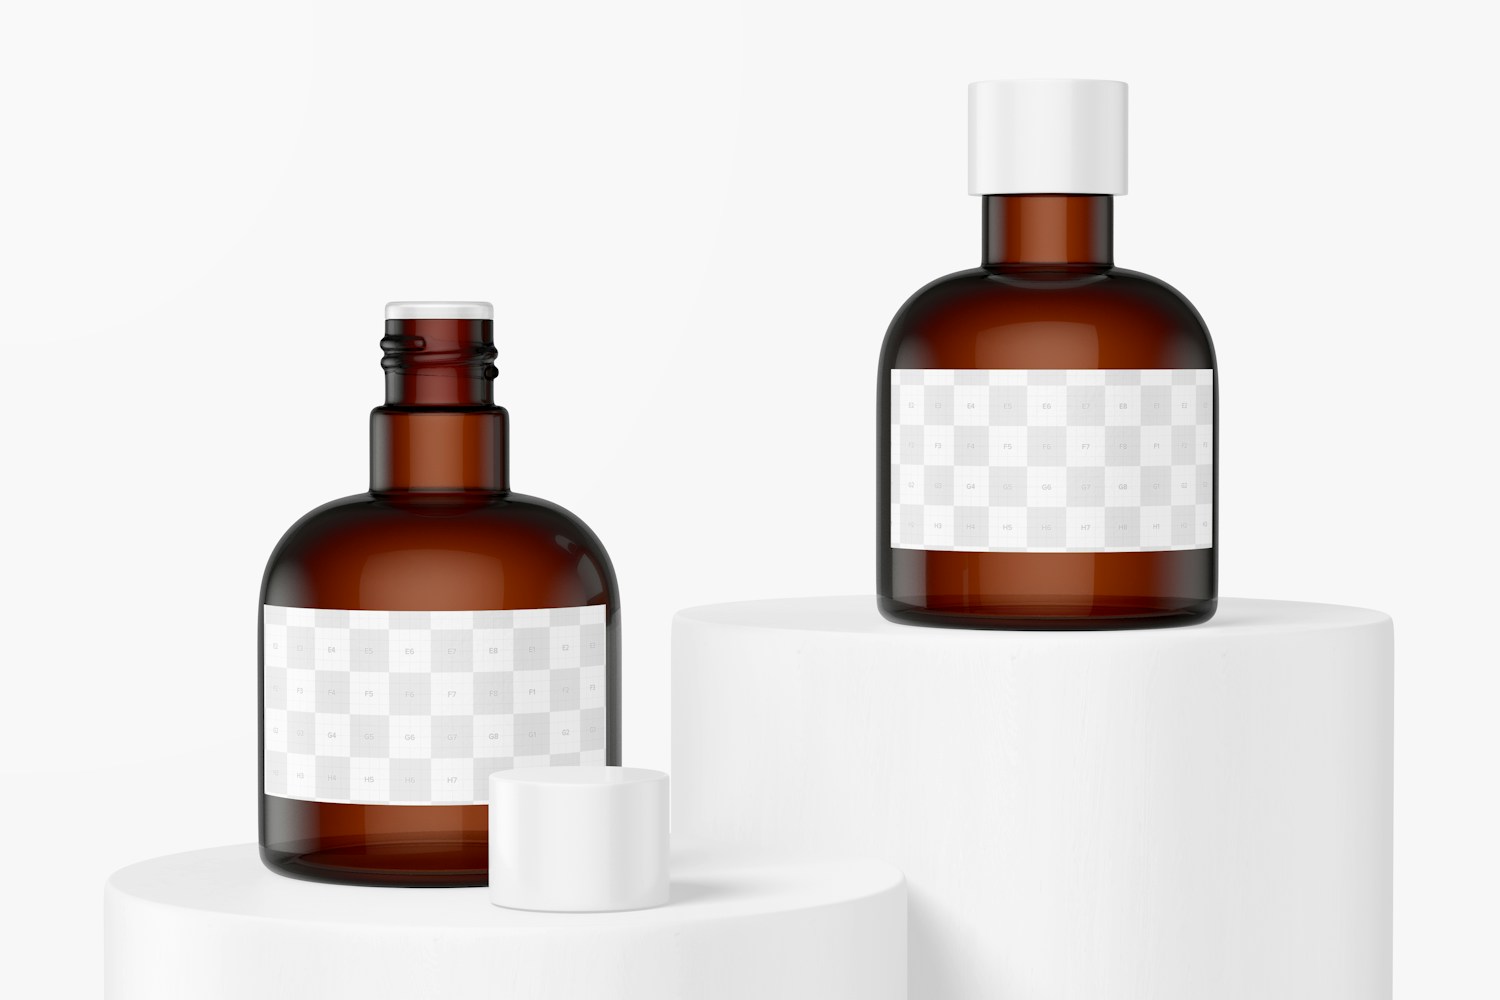 5.7 Oz Oil Bottles Mockup, Opened and Closed